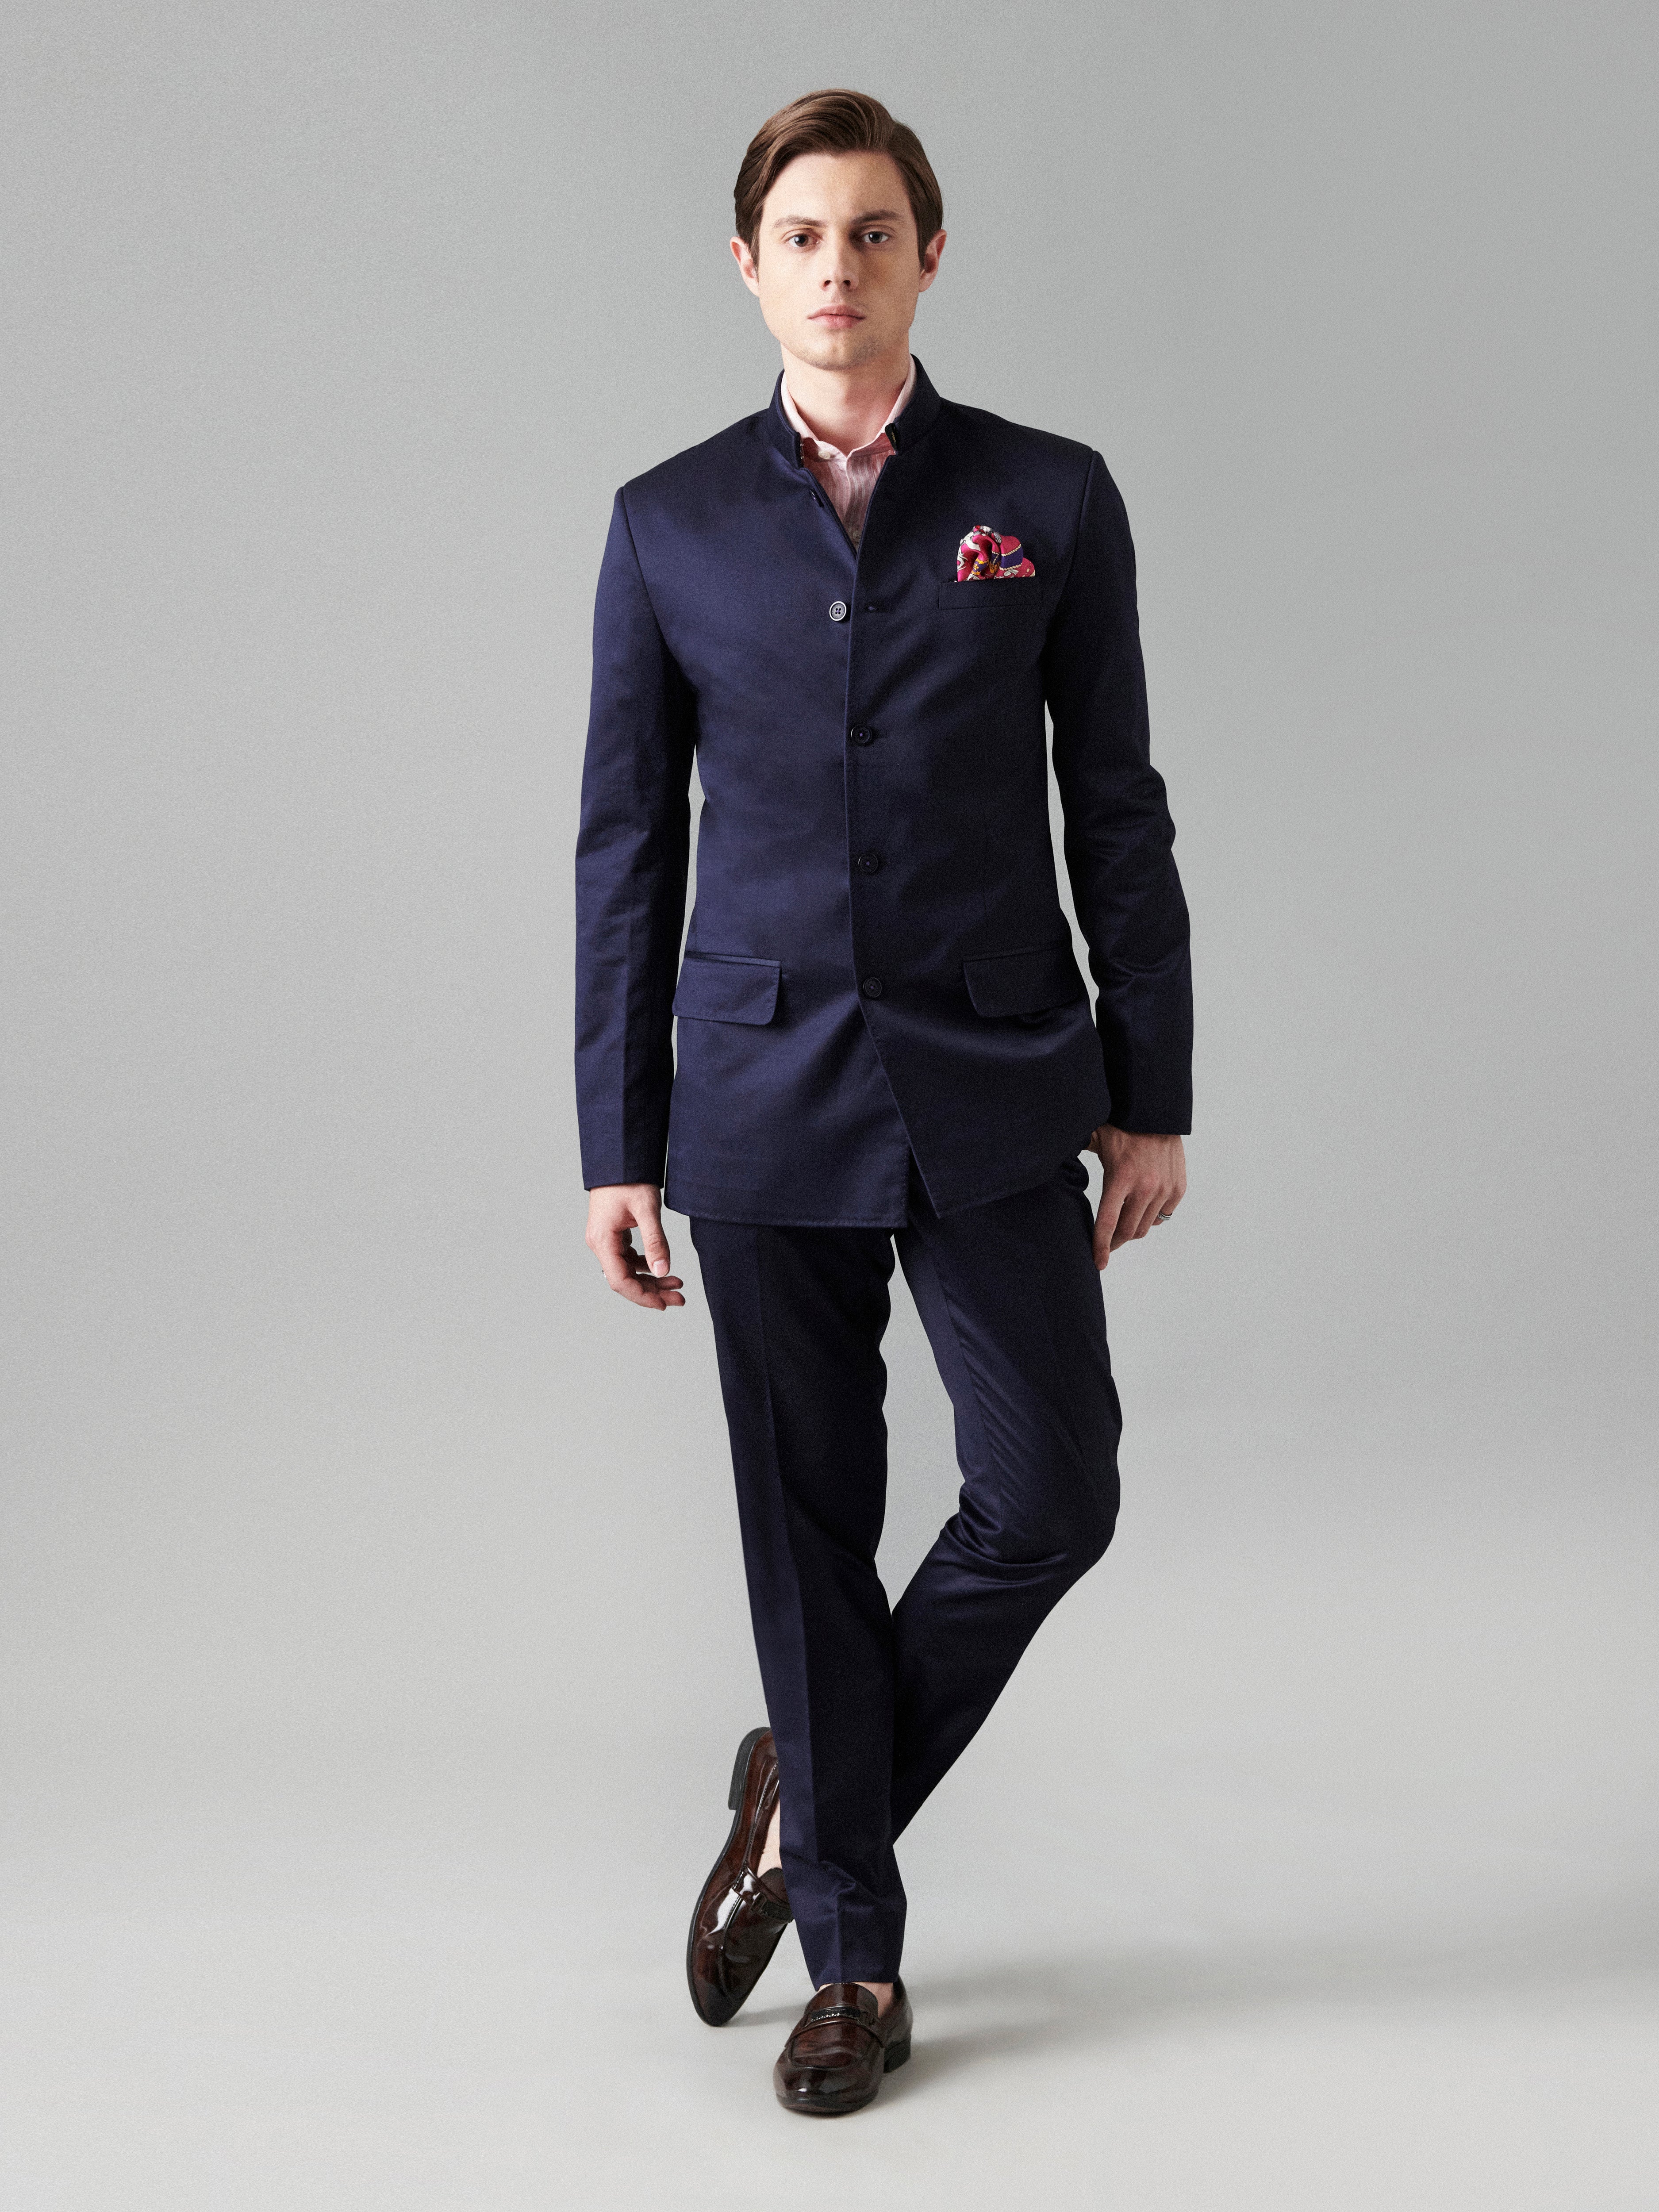 Buy MANQ Men Navy Blue Solid Slim Fit Bandhgala Suit (Size:36) at Amazon.in